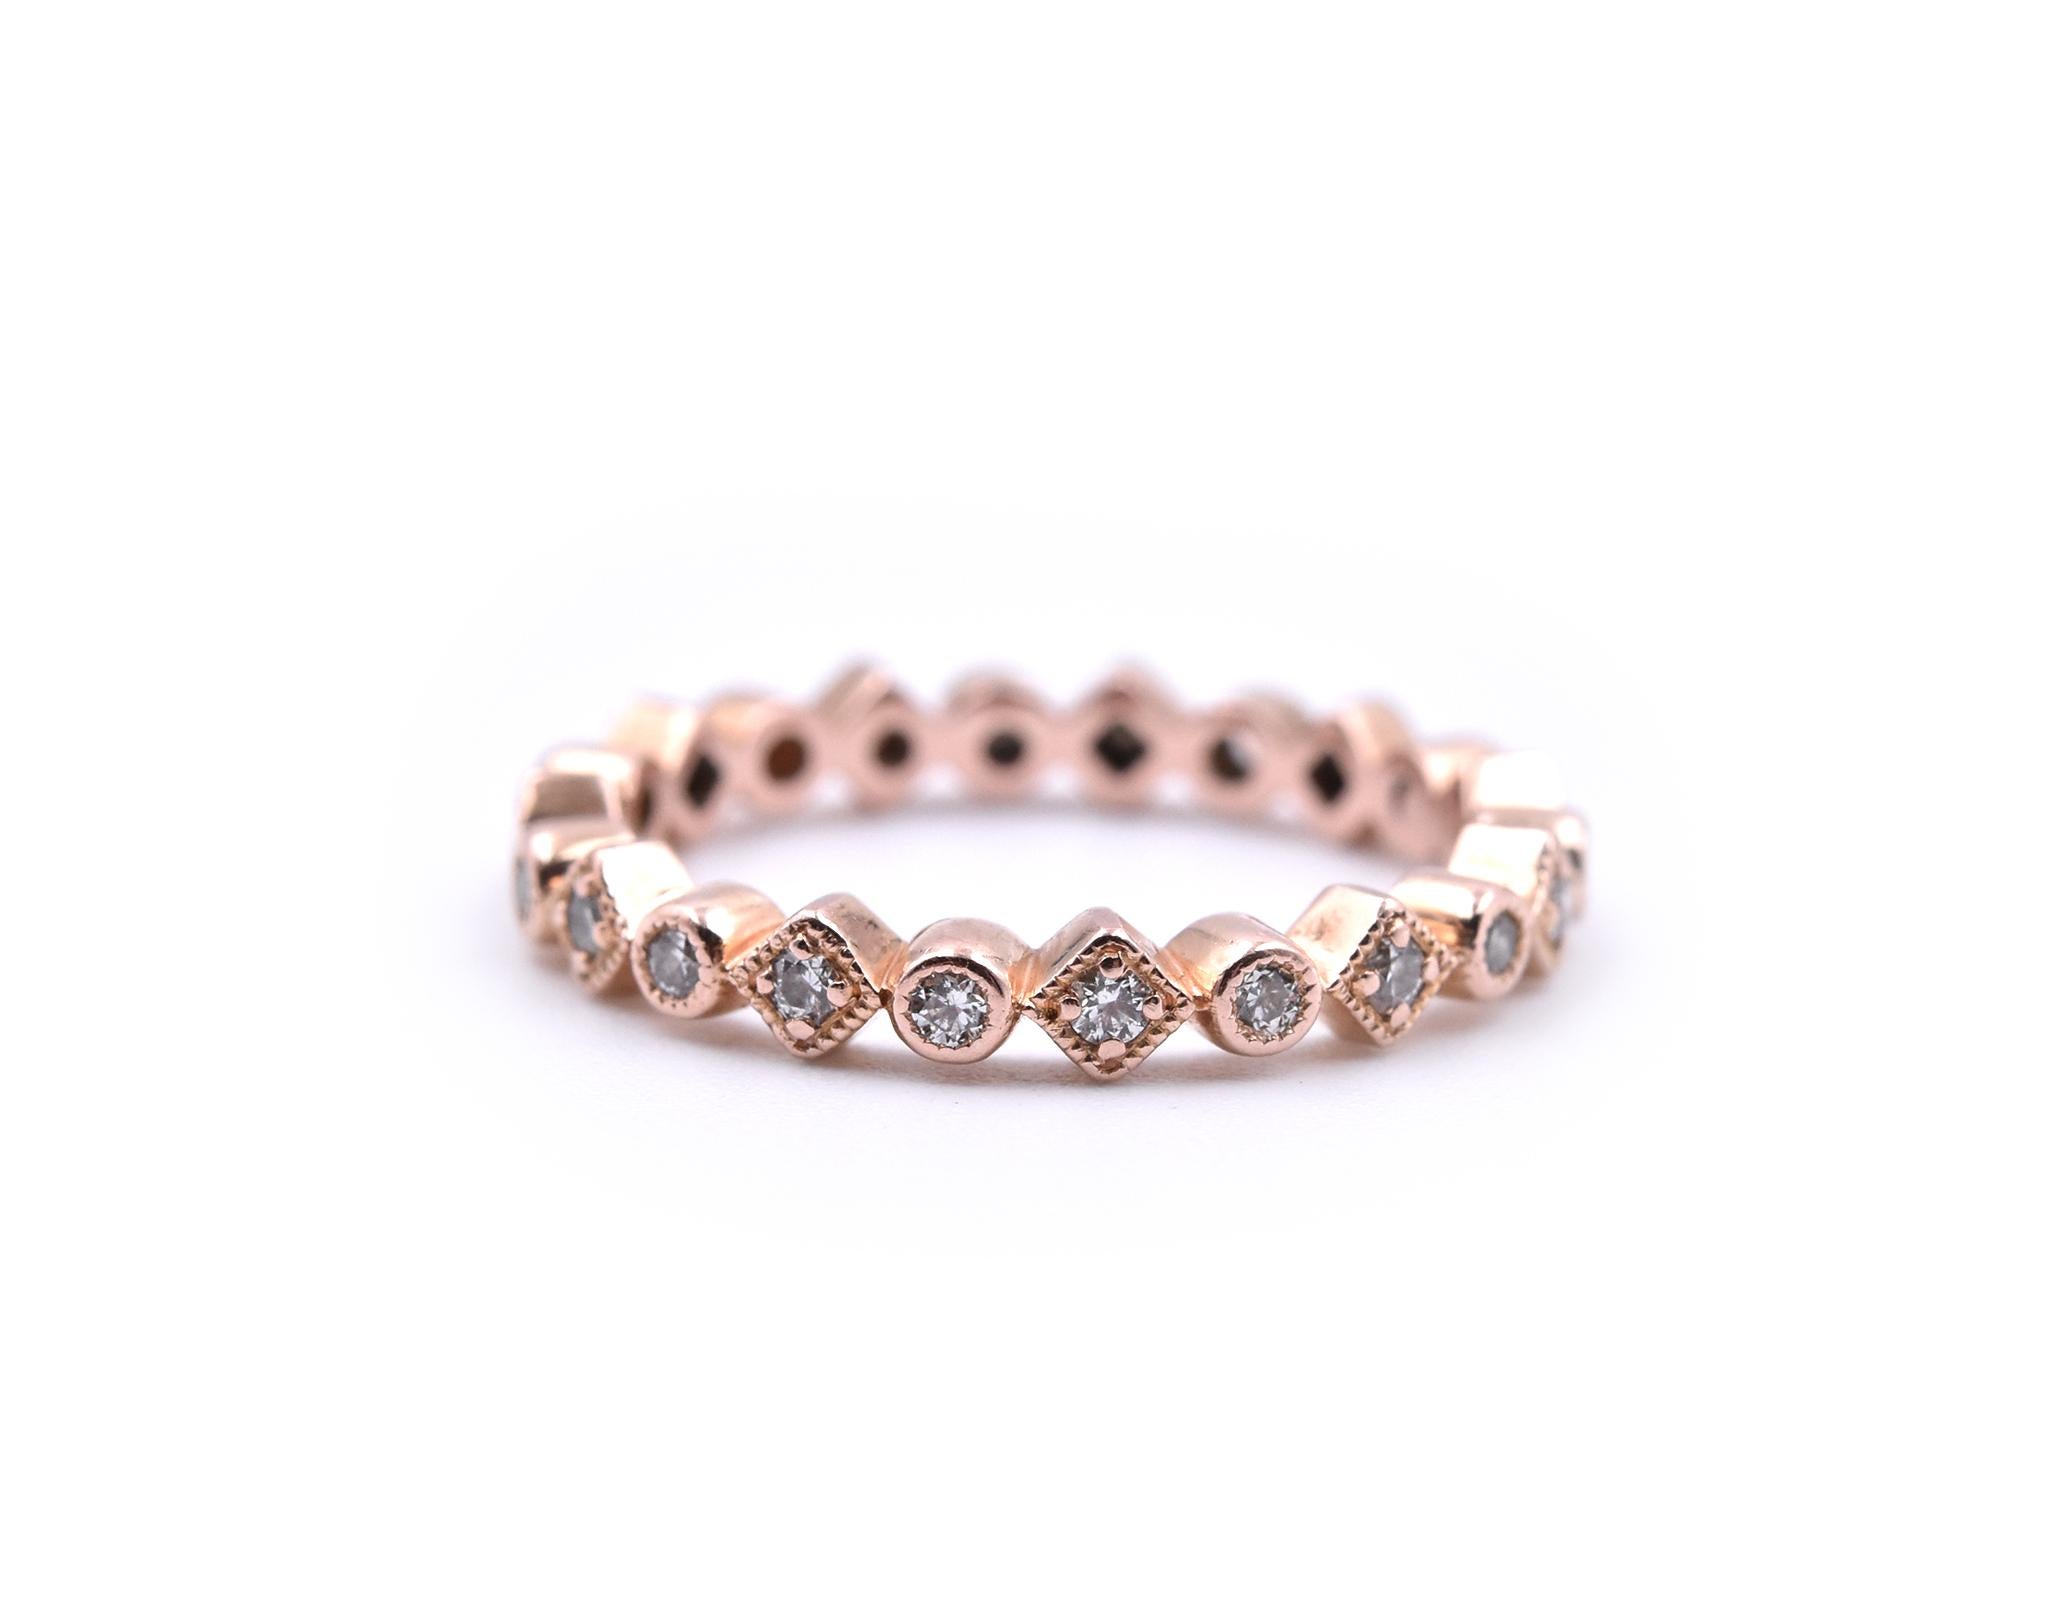 Designer: custom design
Material: 14K Rose Gold
Diamonds: 22 Round Brilliants = .30cttw
Color: H
Clarity: SI1
Size: 5 
Dimensions: Ring is 2.78mm wide
Weight: 1.99 Grams
